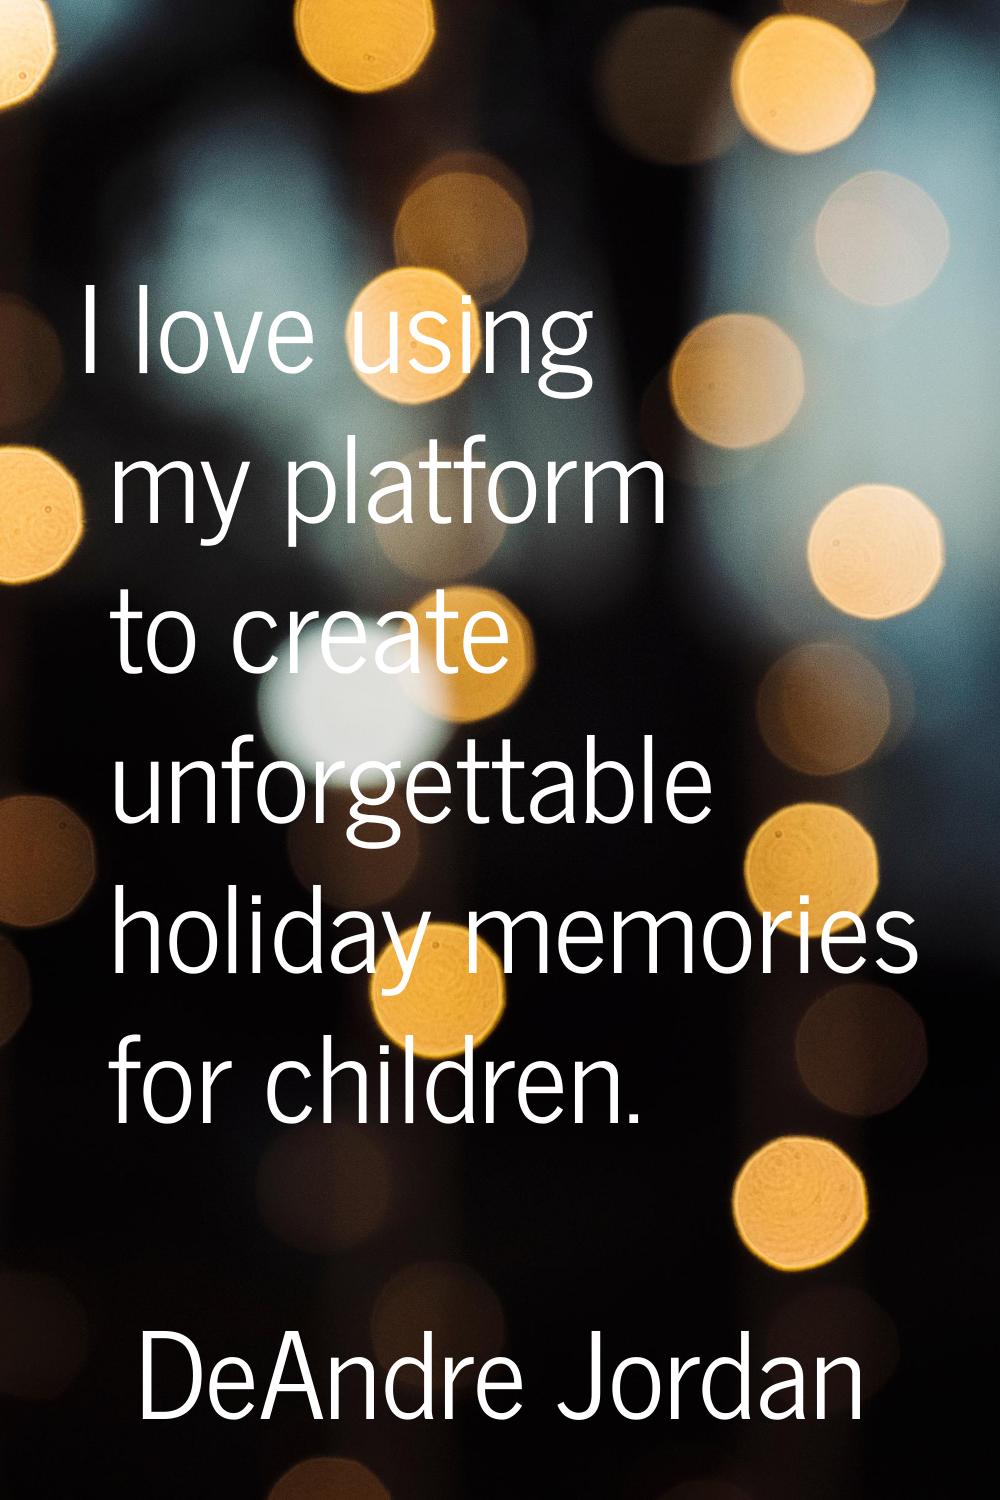 I love using my platform to create unforgettable holiday memories for children.